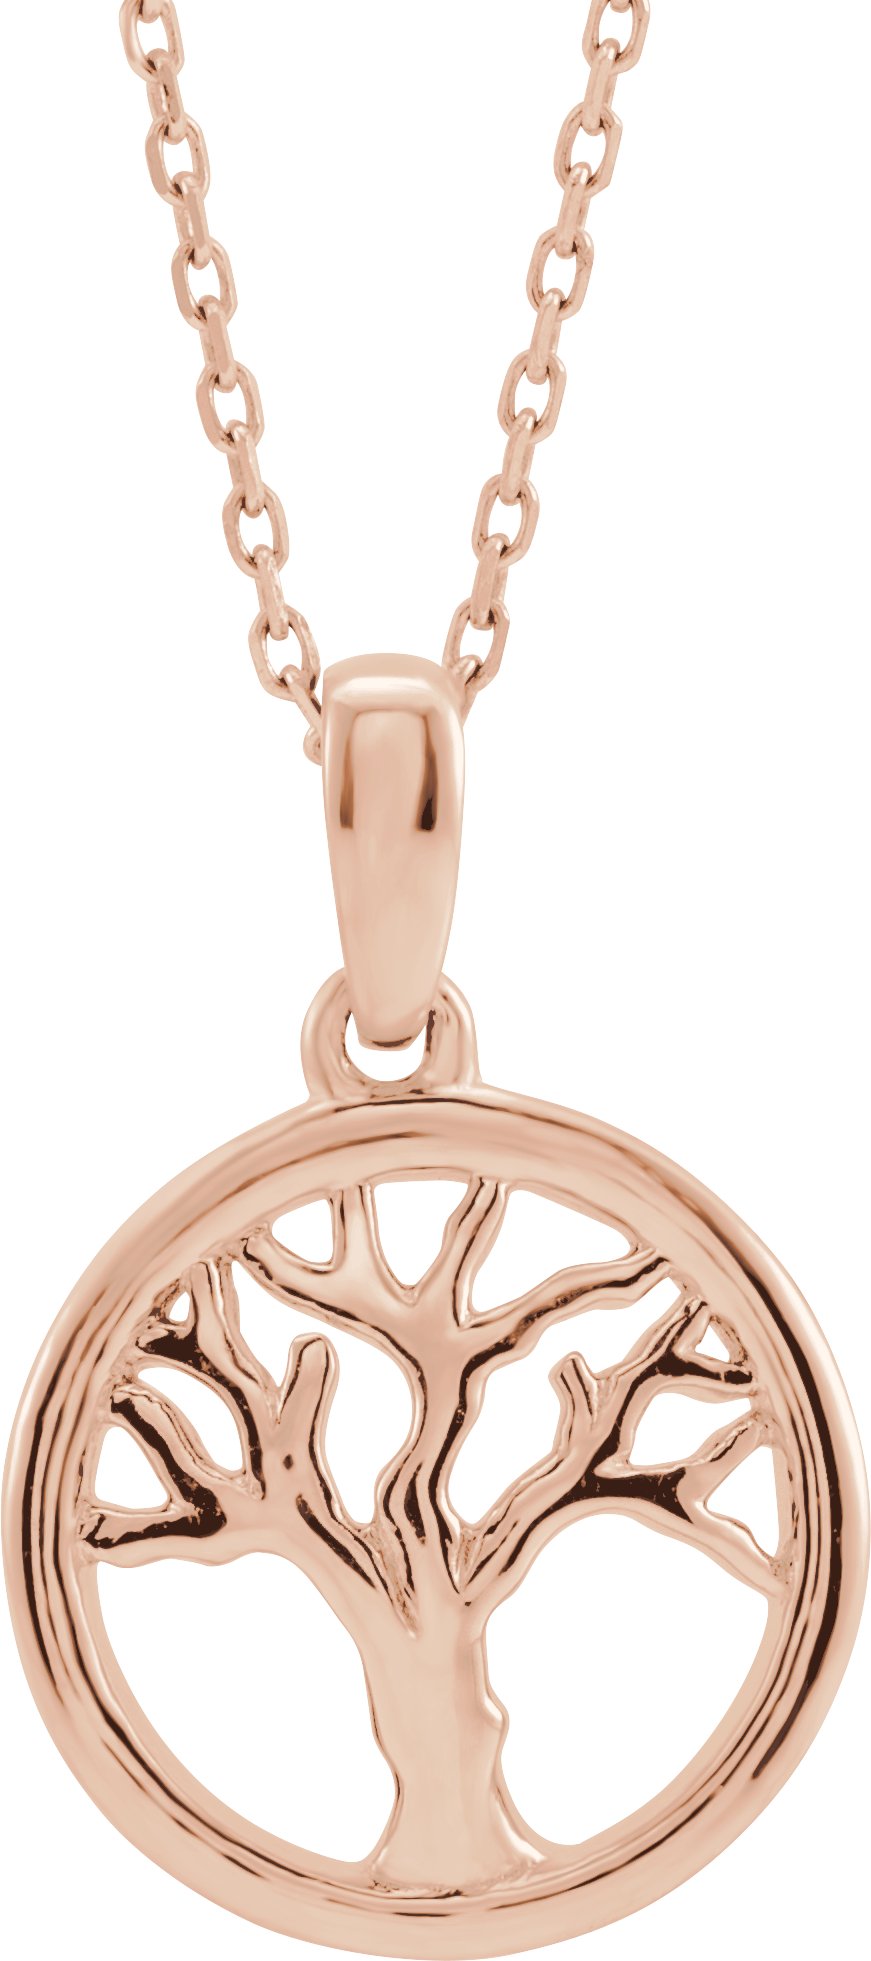 14K Rose Tree of Life 16-18" Necklace